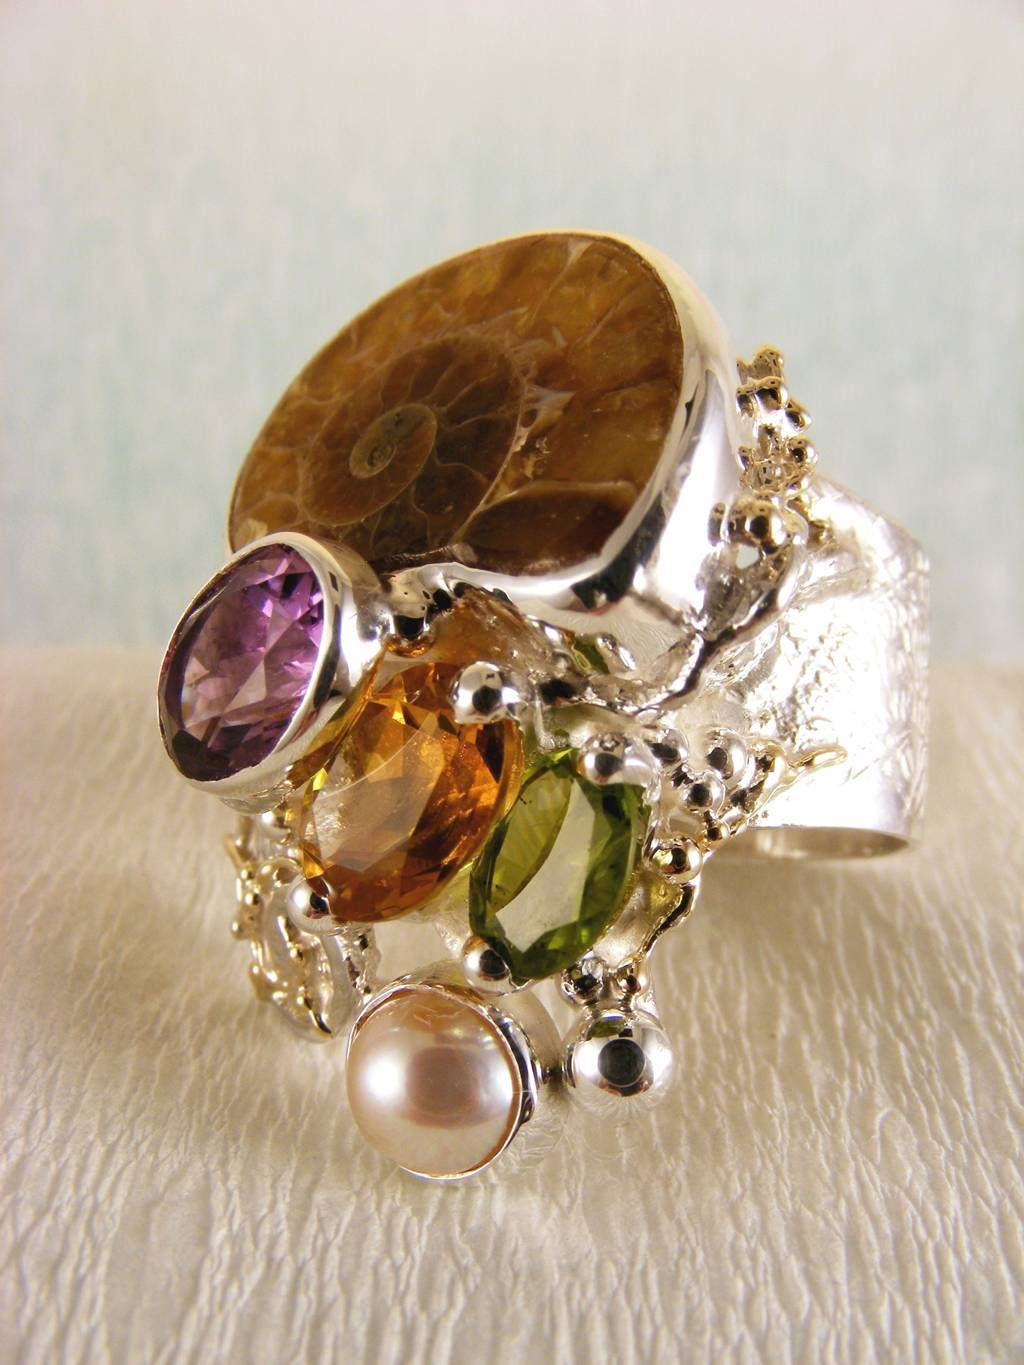 one of a kind jewellery, handmade artisan jewellery, mixed metal artisan jewellery, artisan jewellery with gemstones and pearls, Band #Ring 5240